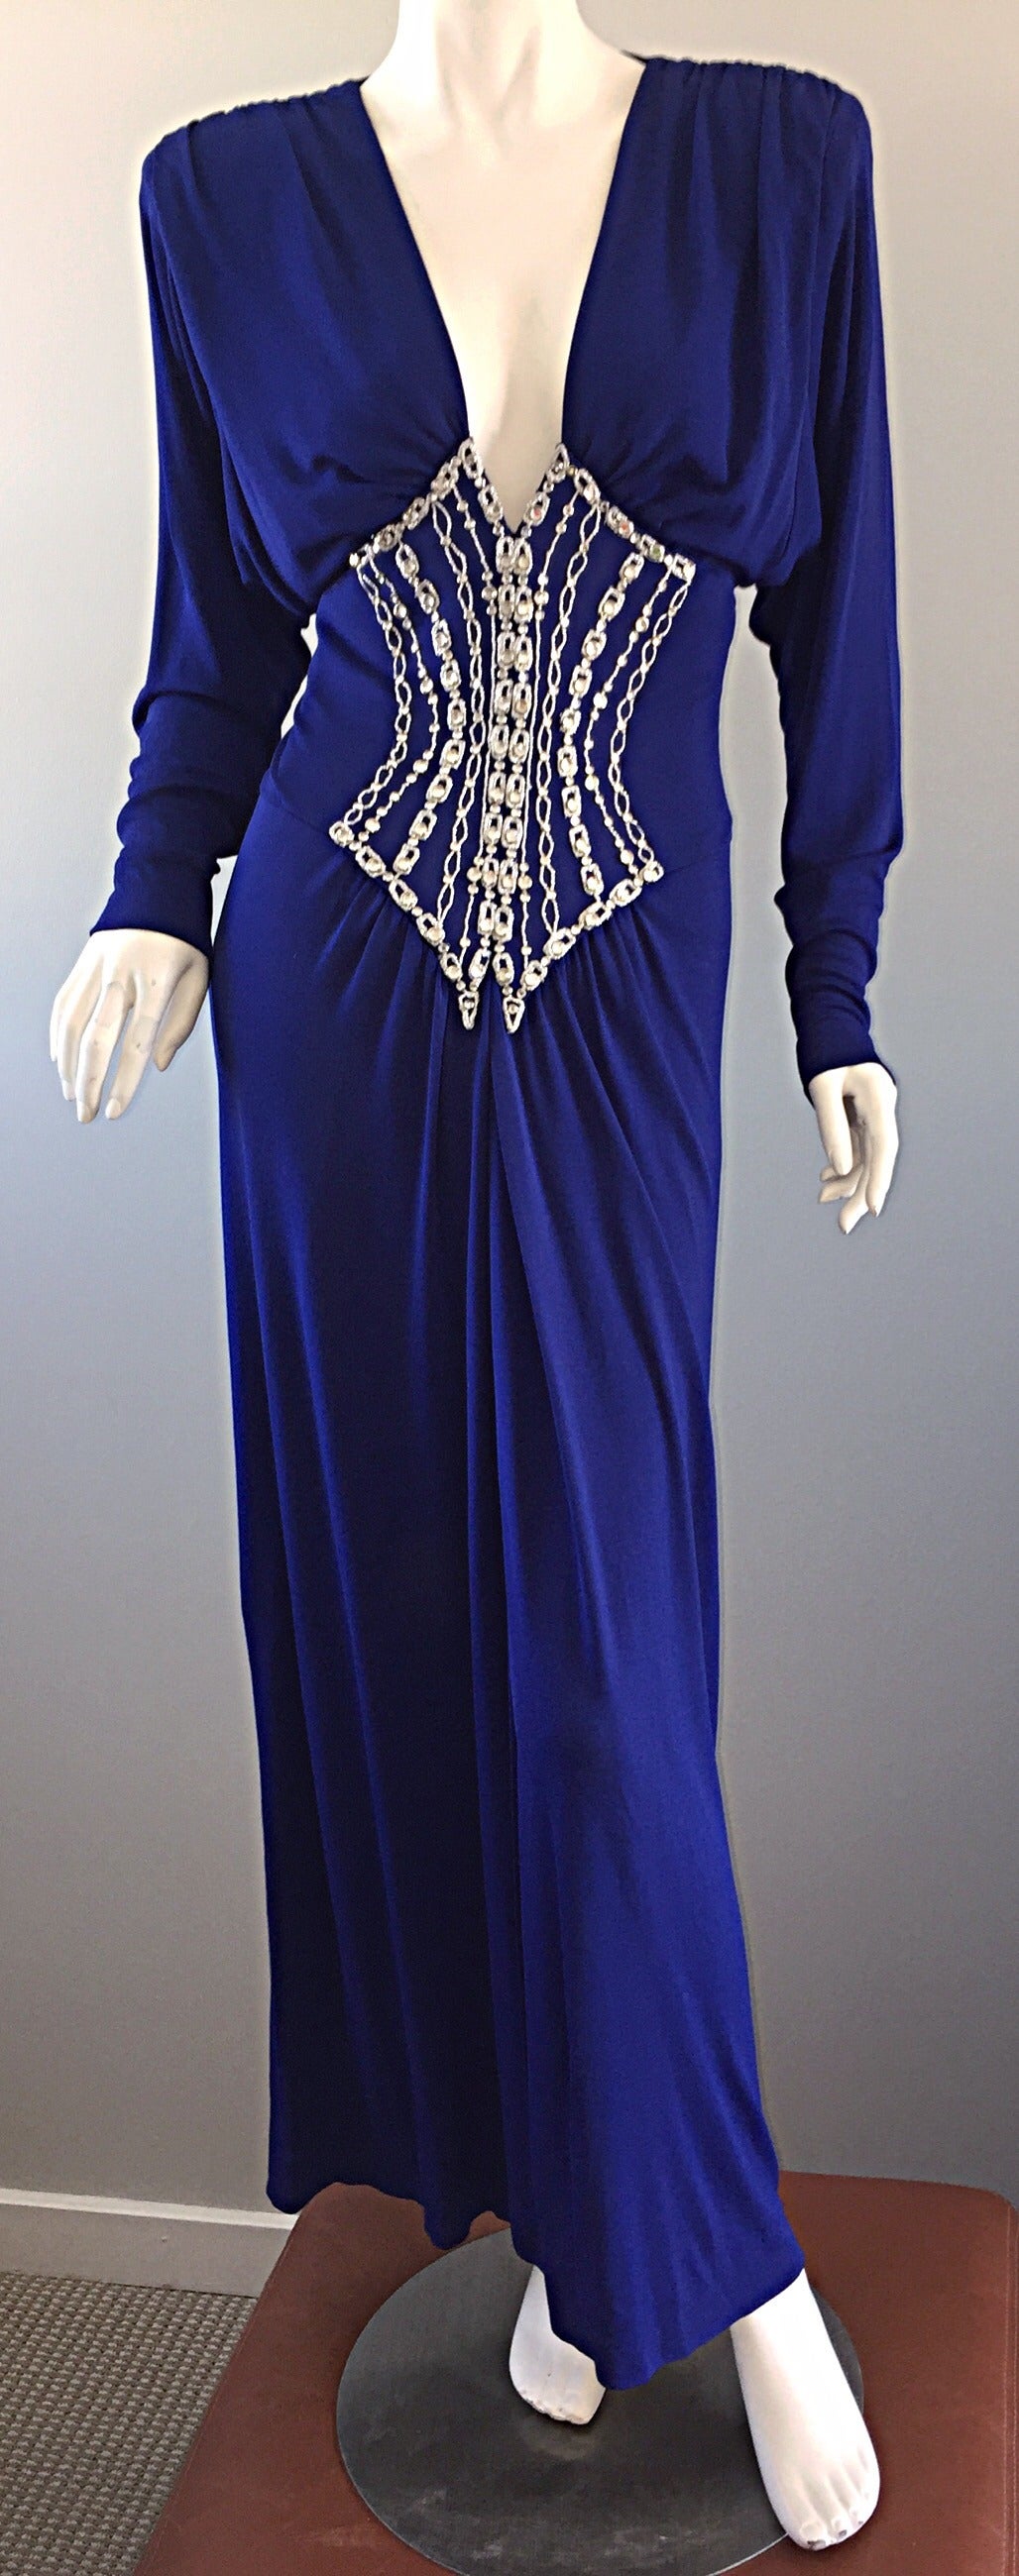 Incredibly sexy vintage Bob Mackie royal blue silk jersey dress! Striking vibrant color, that features 'extreme' shoulders that resemble a 1940s style. Rhinestone encrusted bodice that slims the waistline, along with interior boning. Peek-a-boo